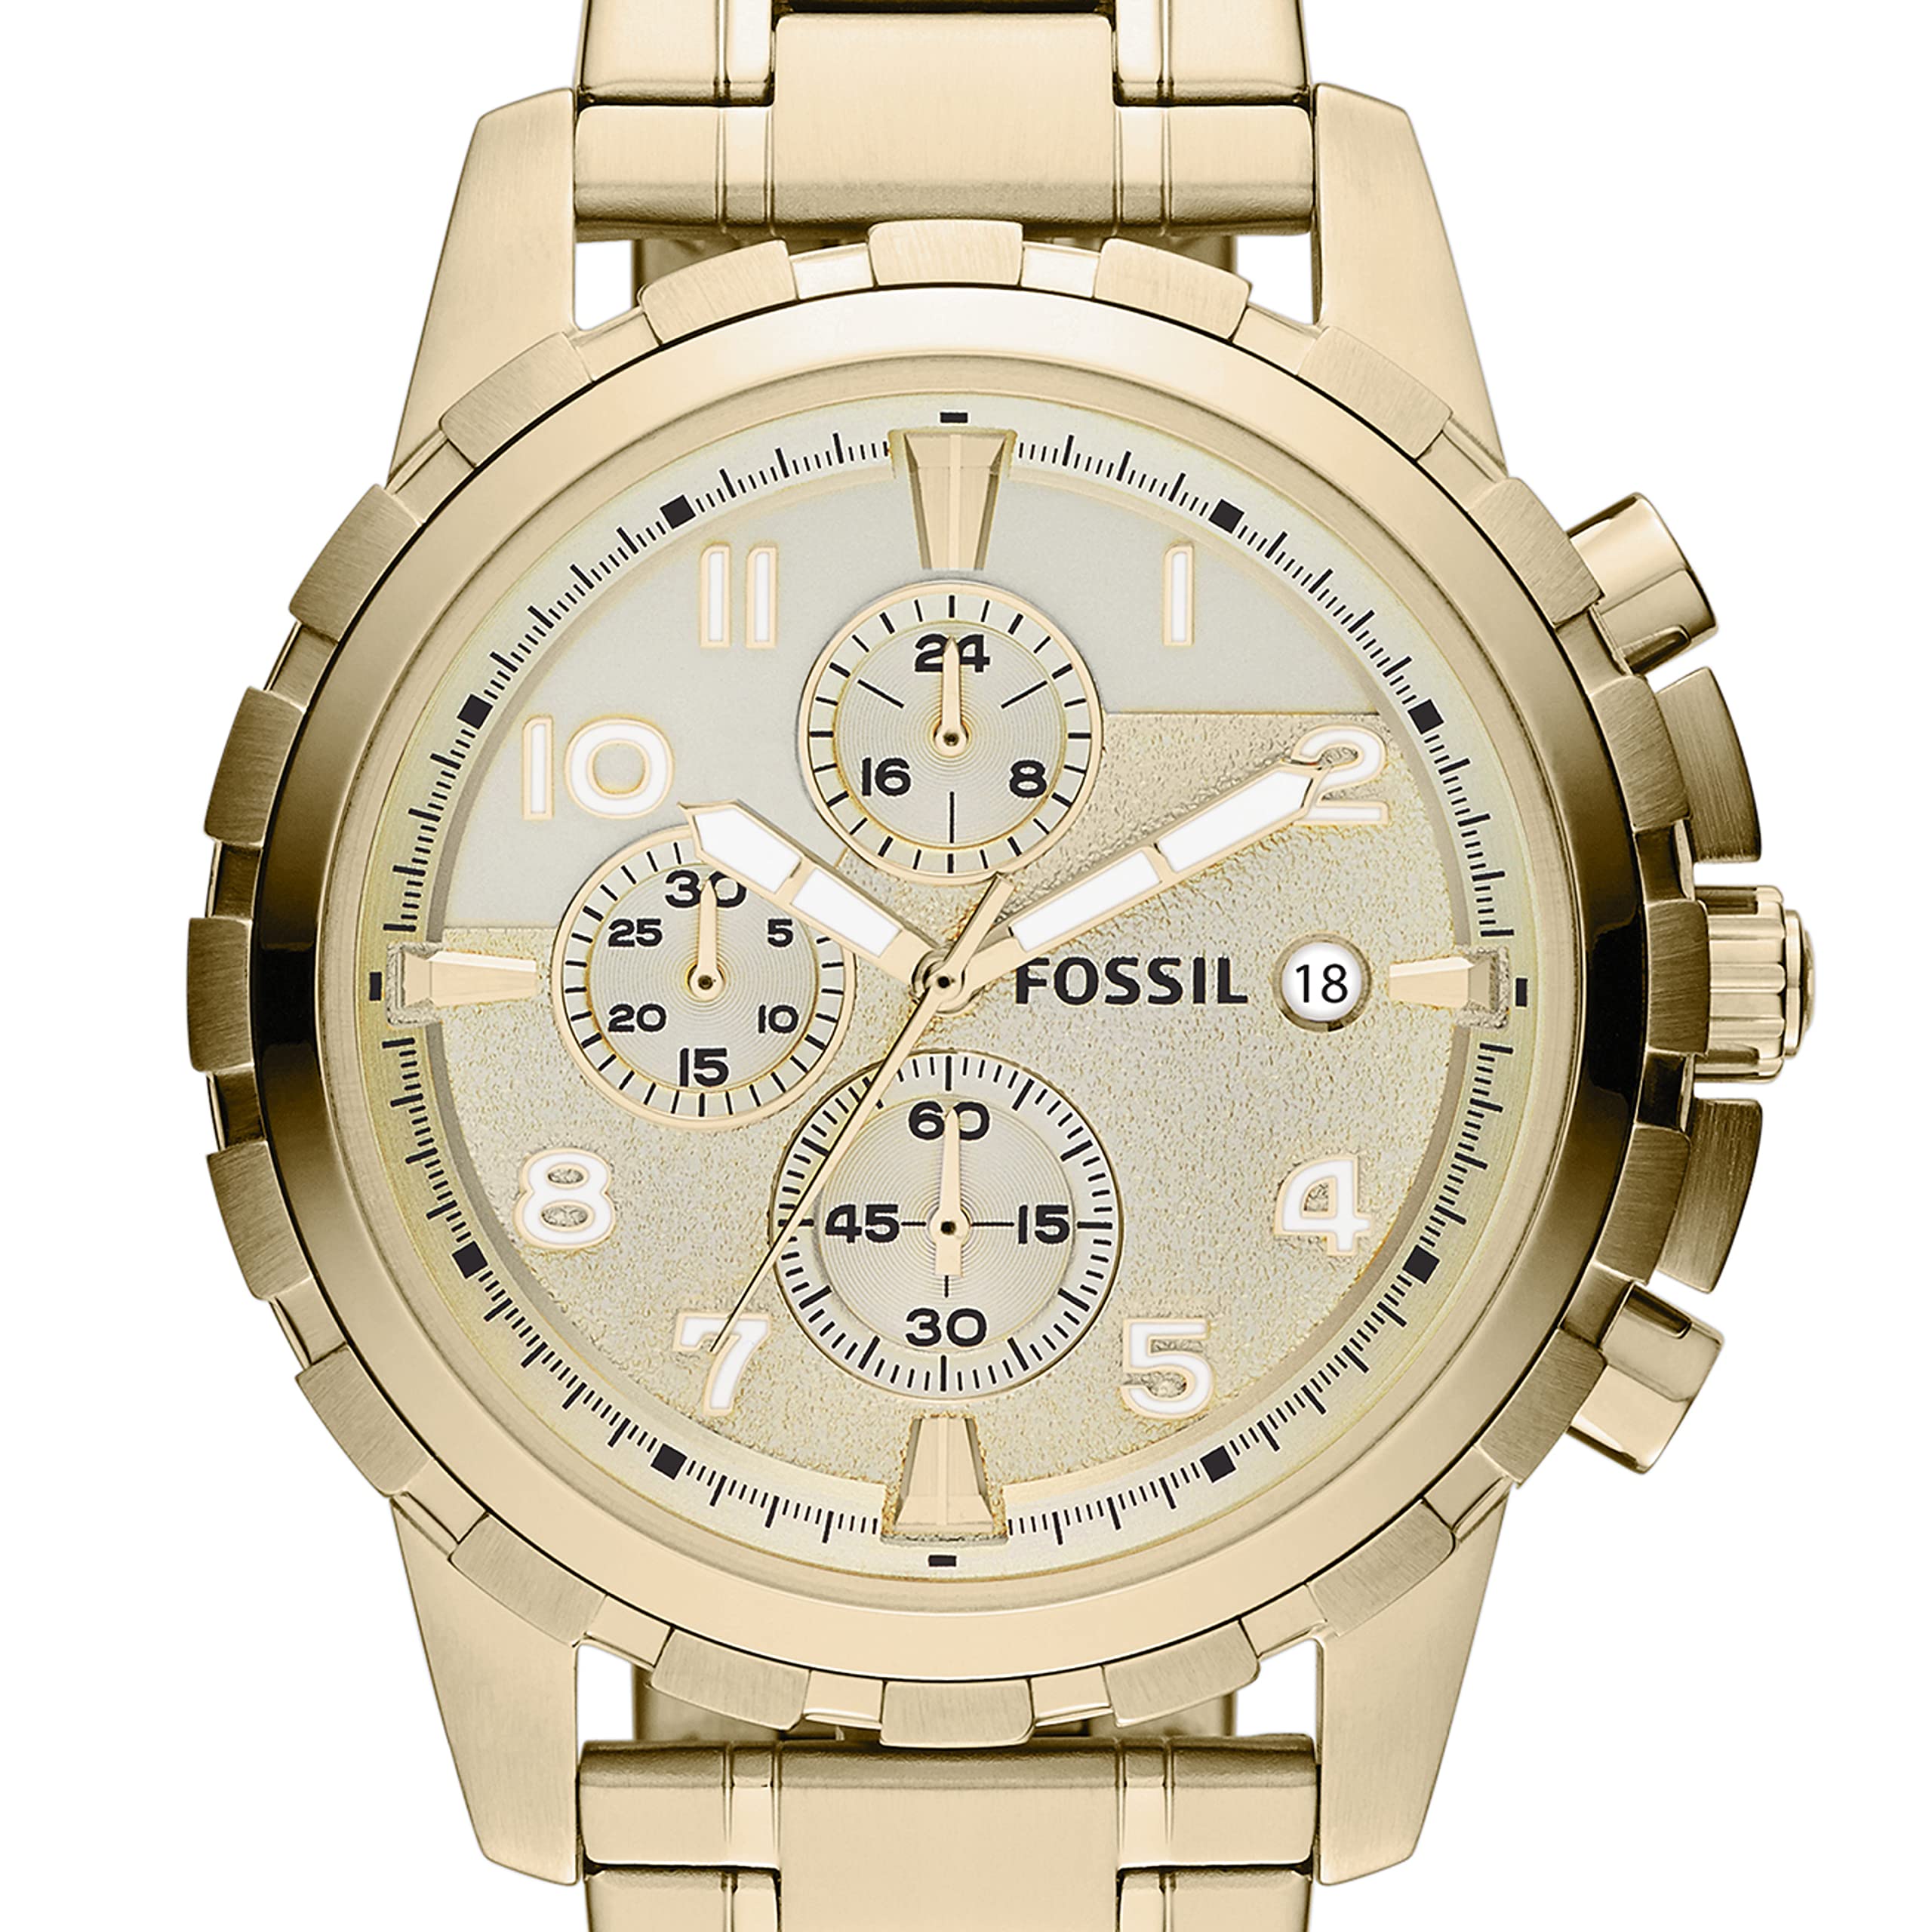 Fossil Men's Dean Stainless Steel Quartz Dress Chronograph Watch (Gold) $51.99 + Free Shipping